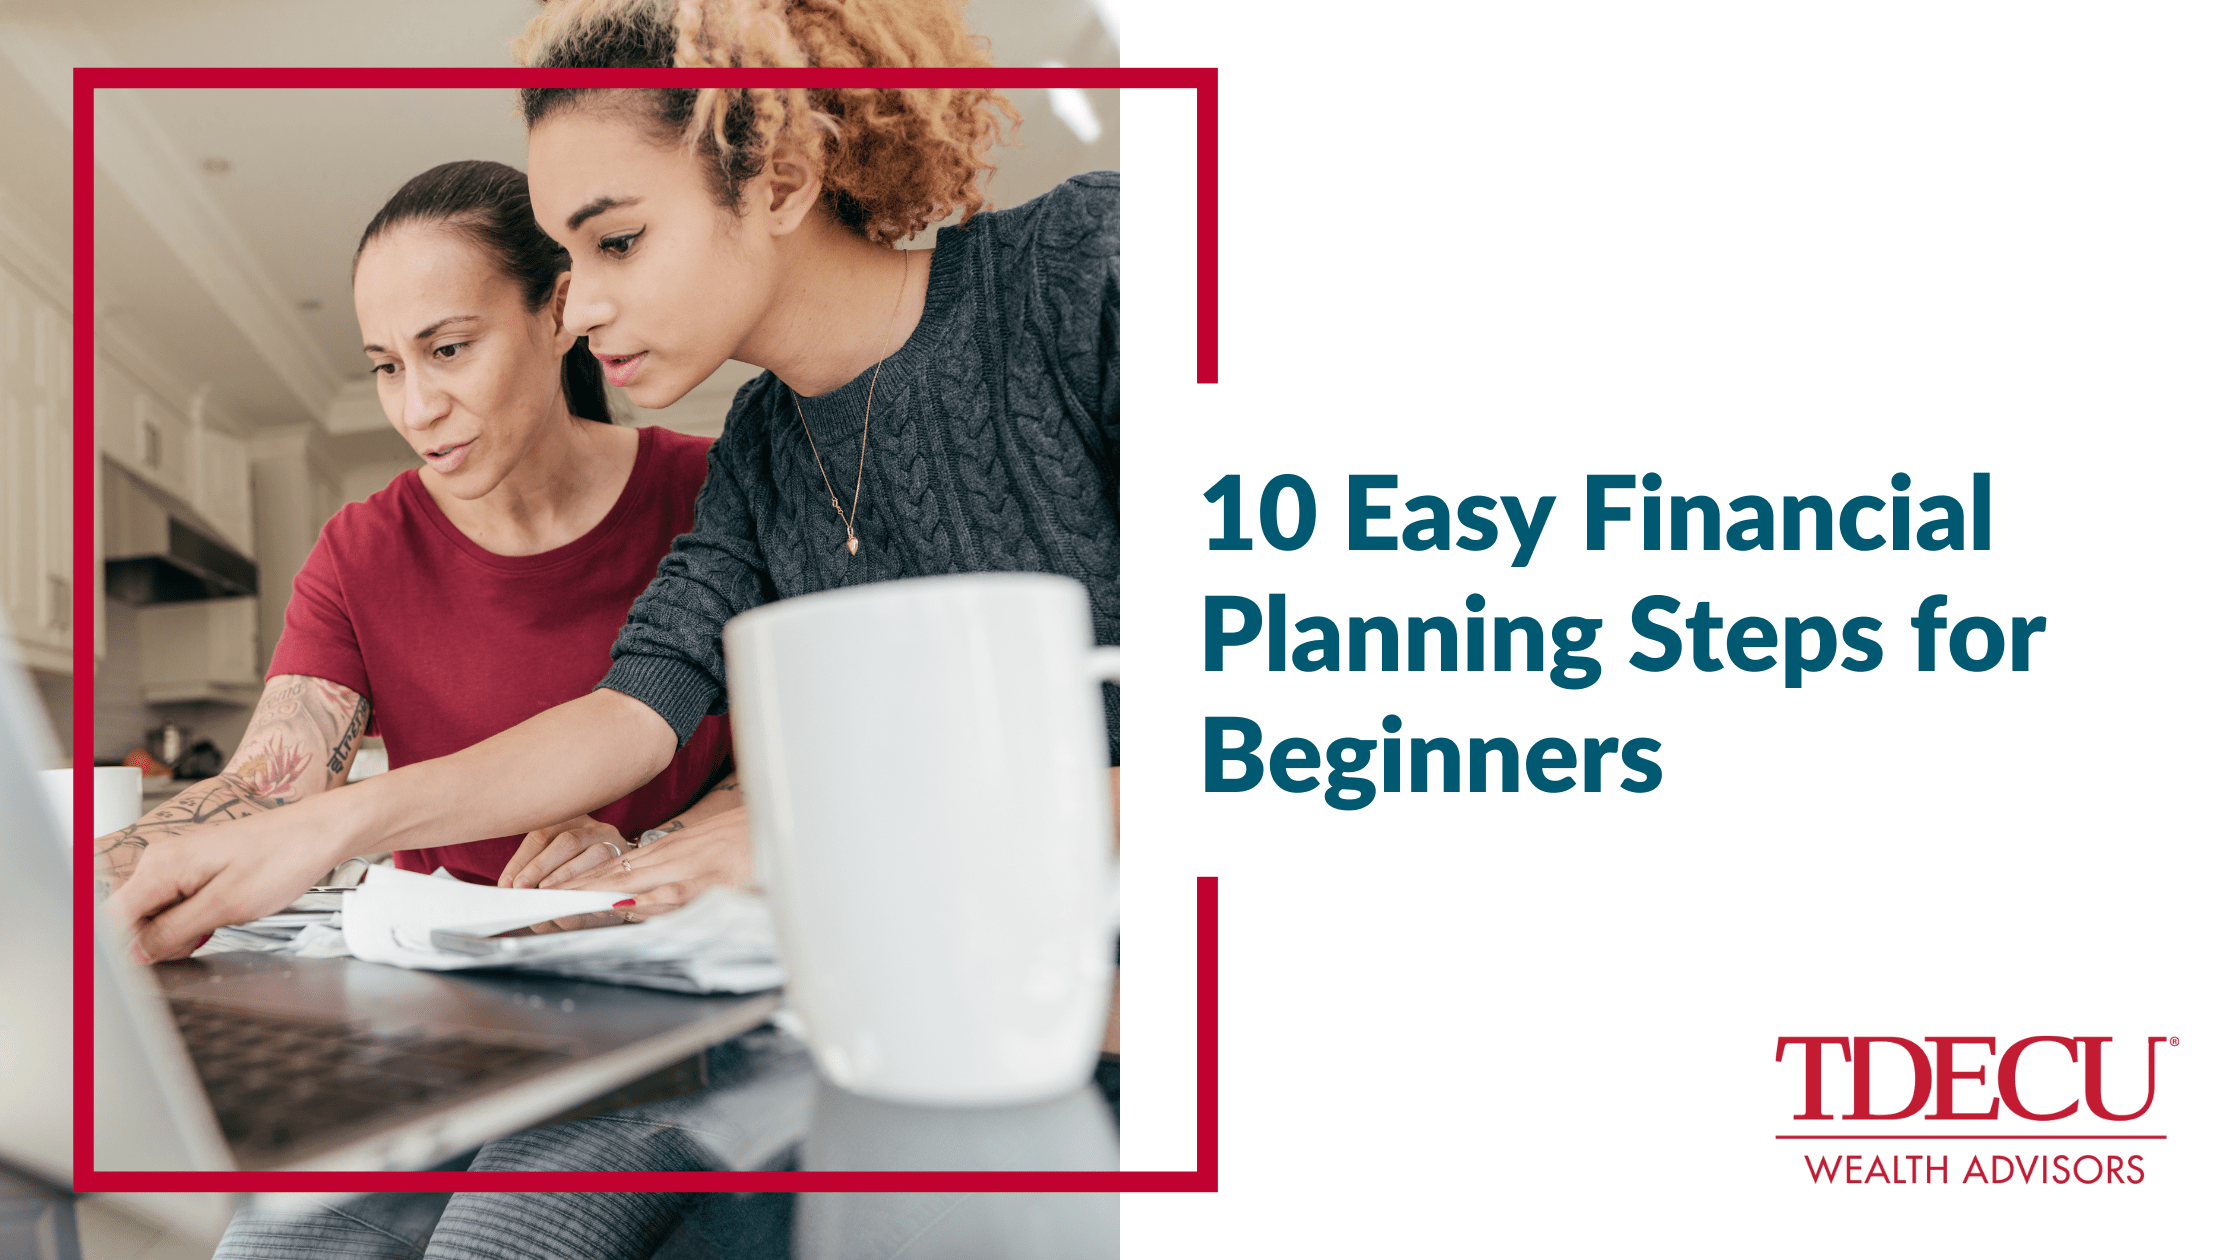 10 Easy Financial Planning Steps for Beginners